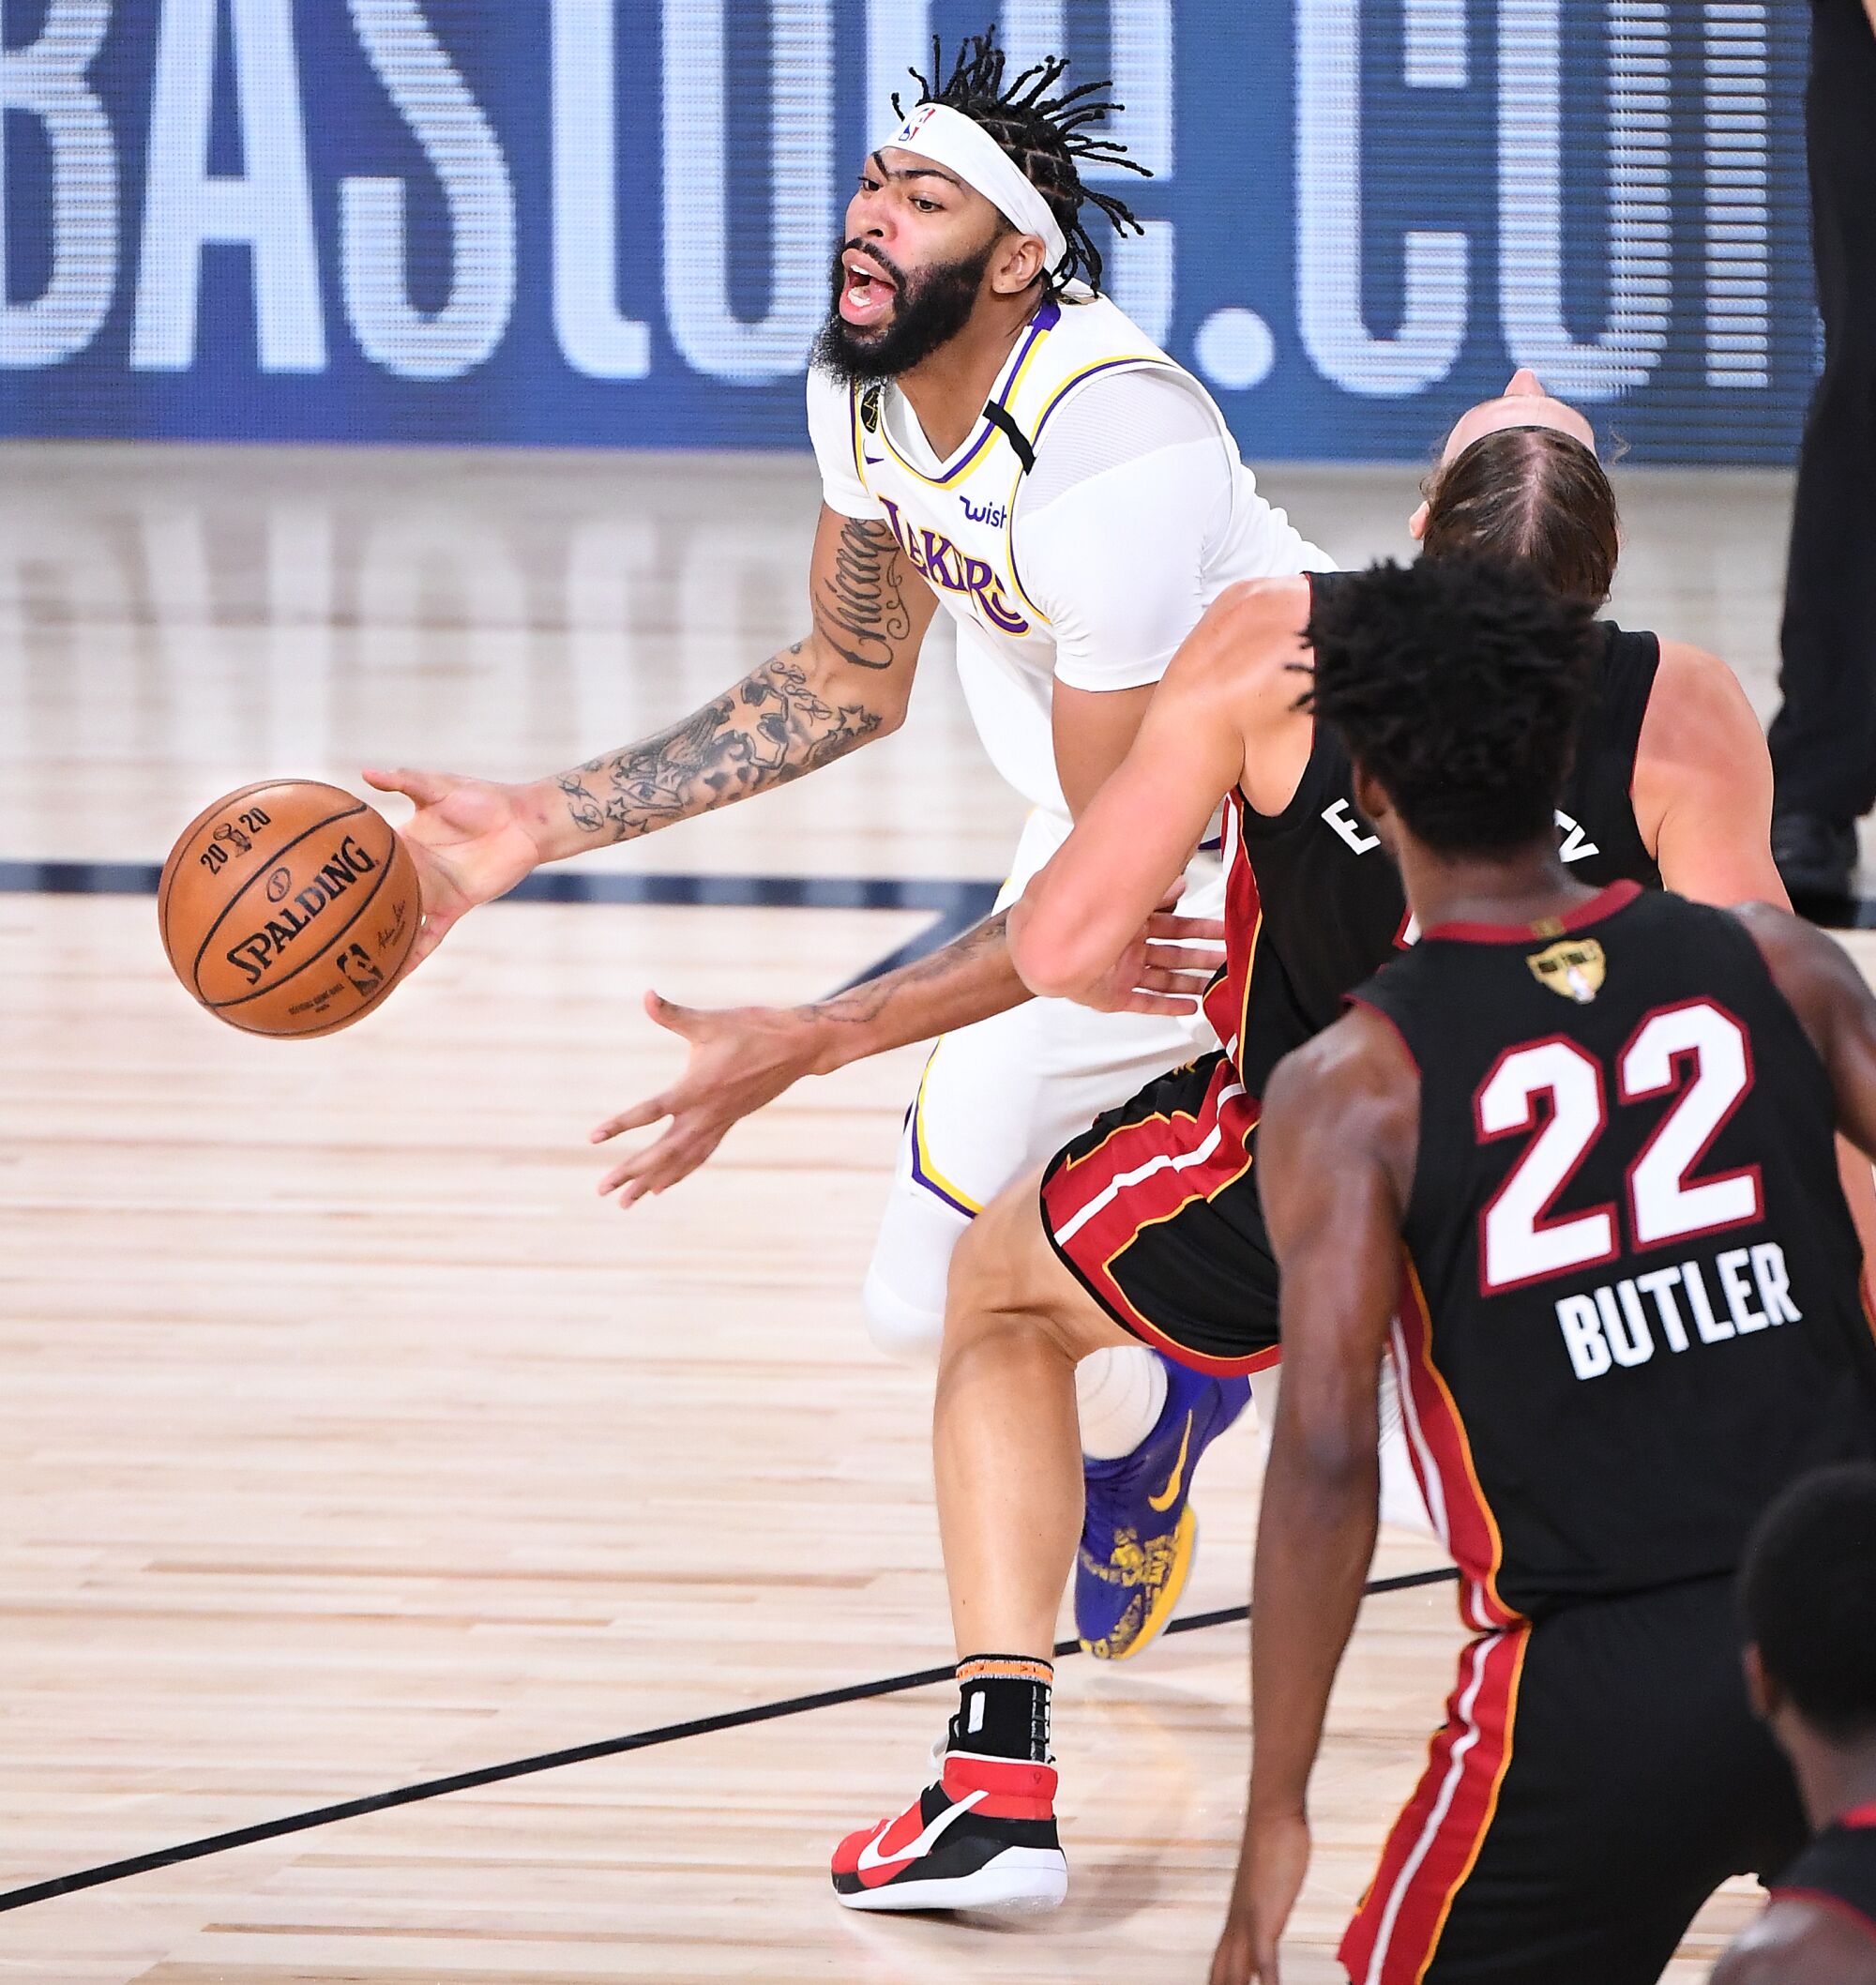 Lakers forward Anthony Davis commits a foul by charging into Heat center Kelly Olynyk during Game 3.